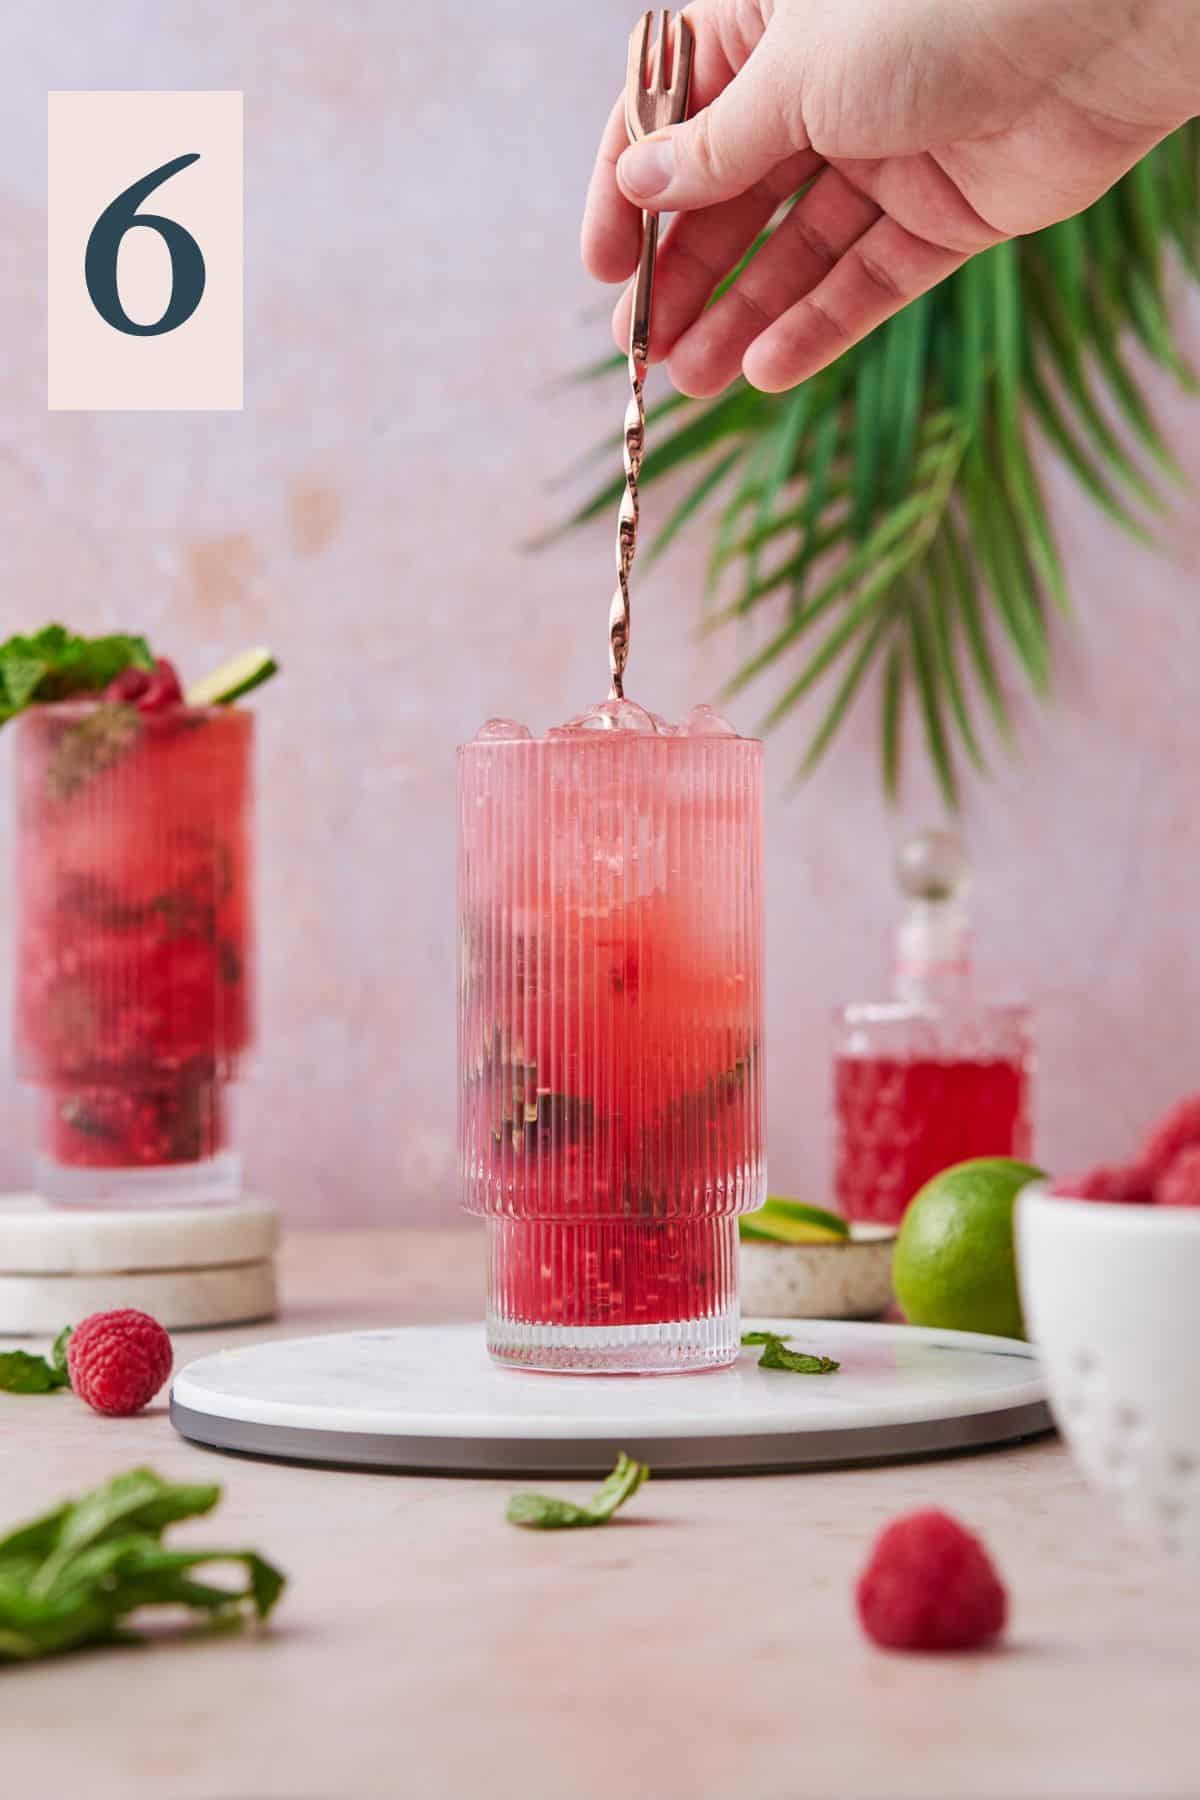 Stirring raspberry mojito to mix ingredients together to finish off the drink.